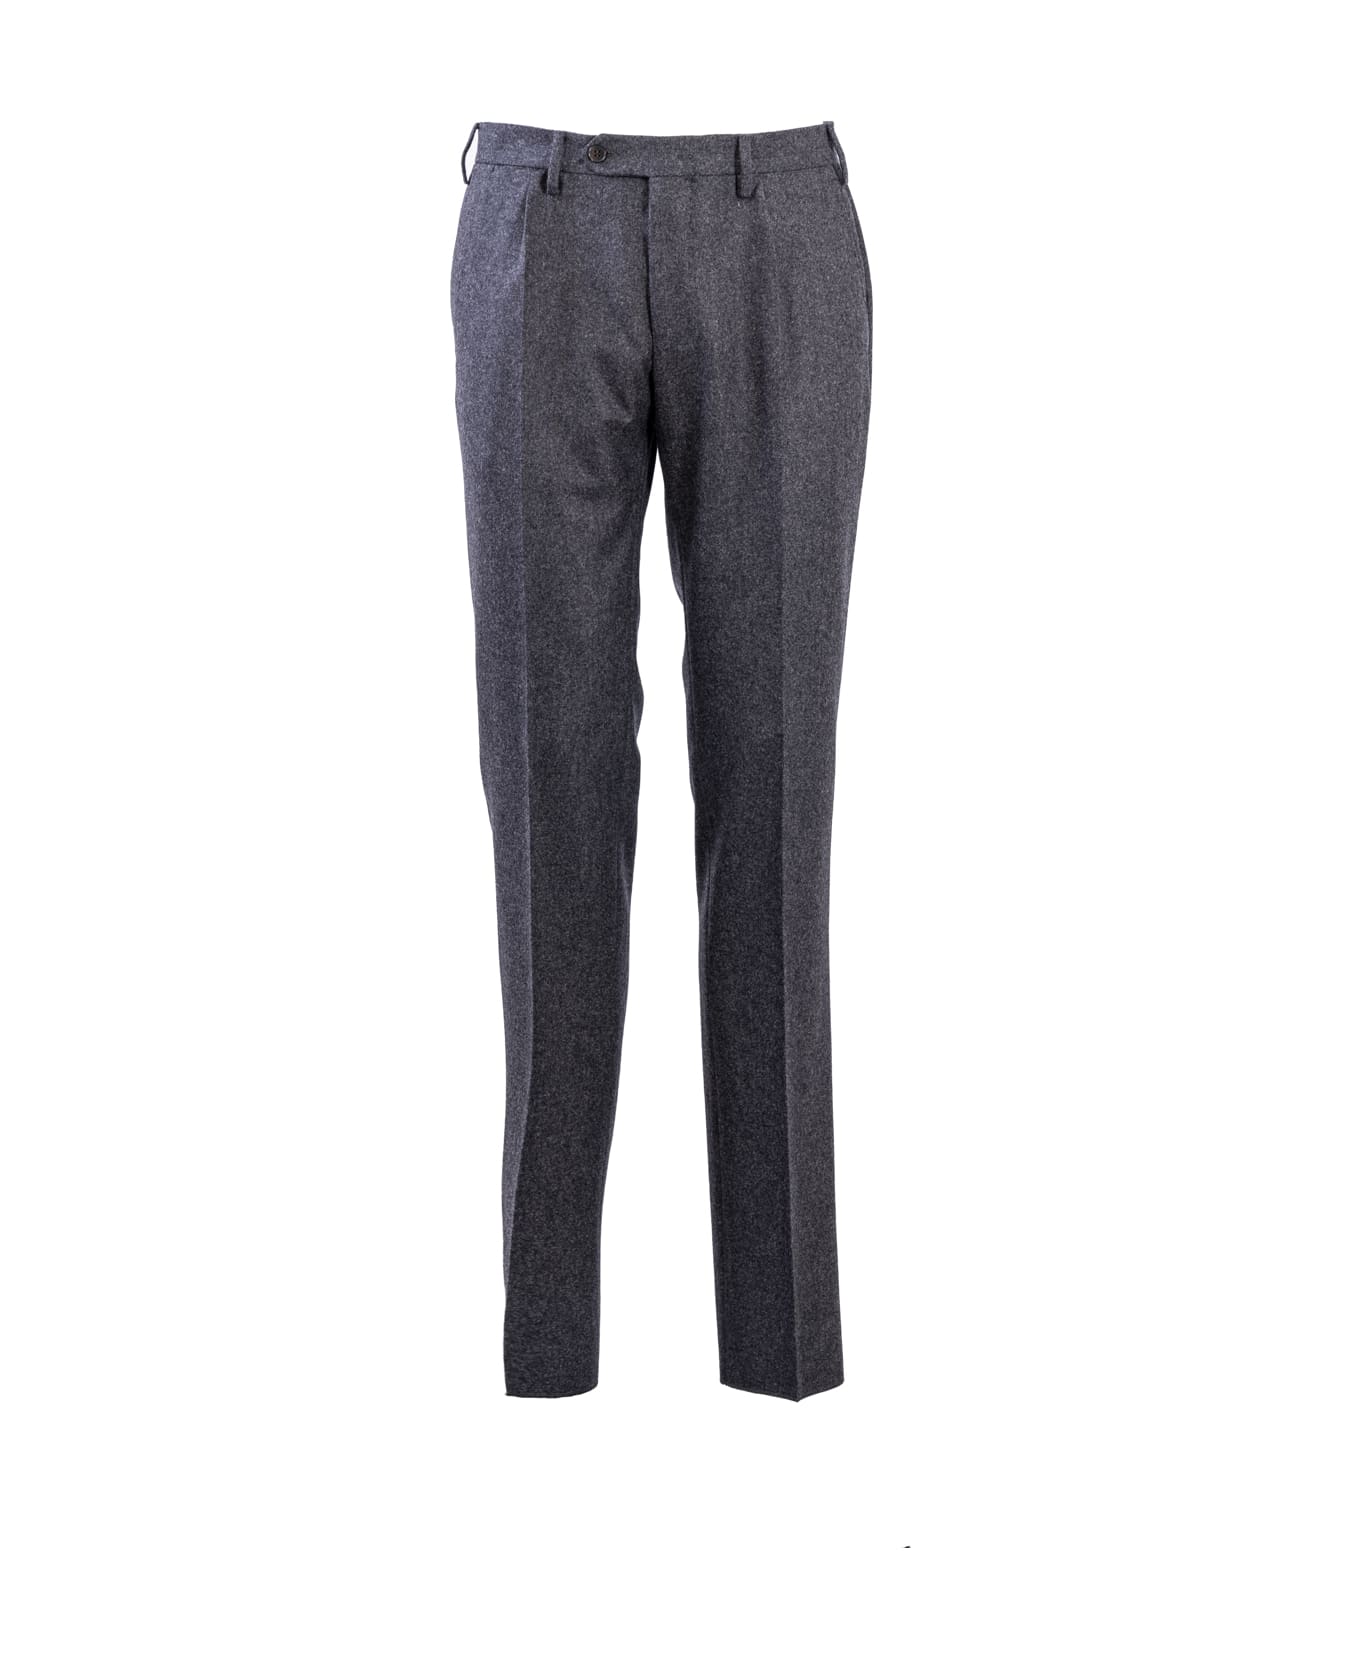 Germano Zama Germano Trousers Anthracite - Anthracite ボトムス